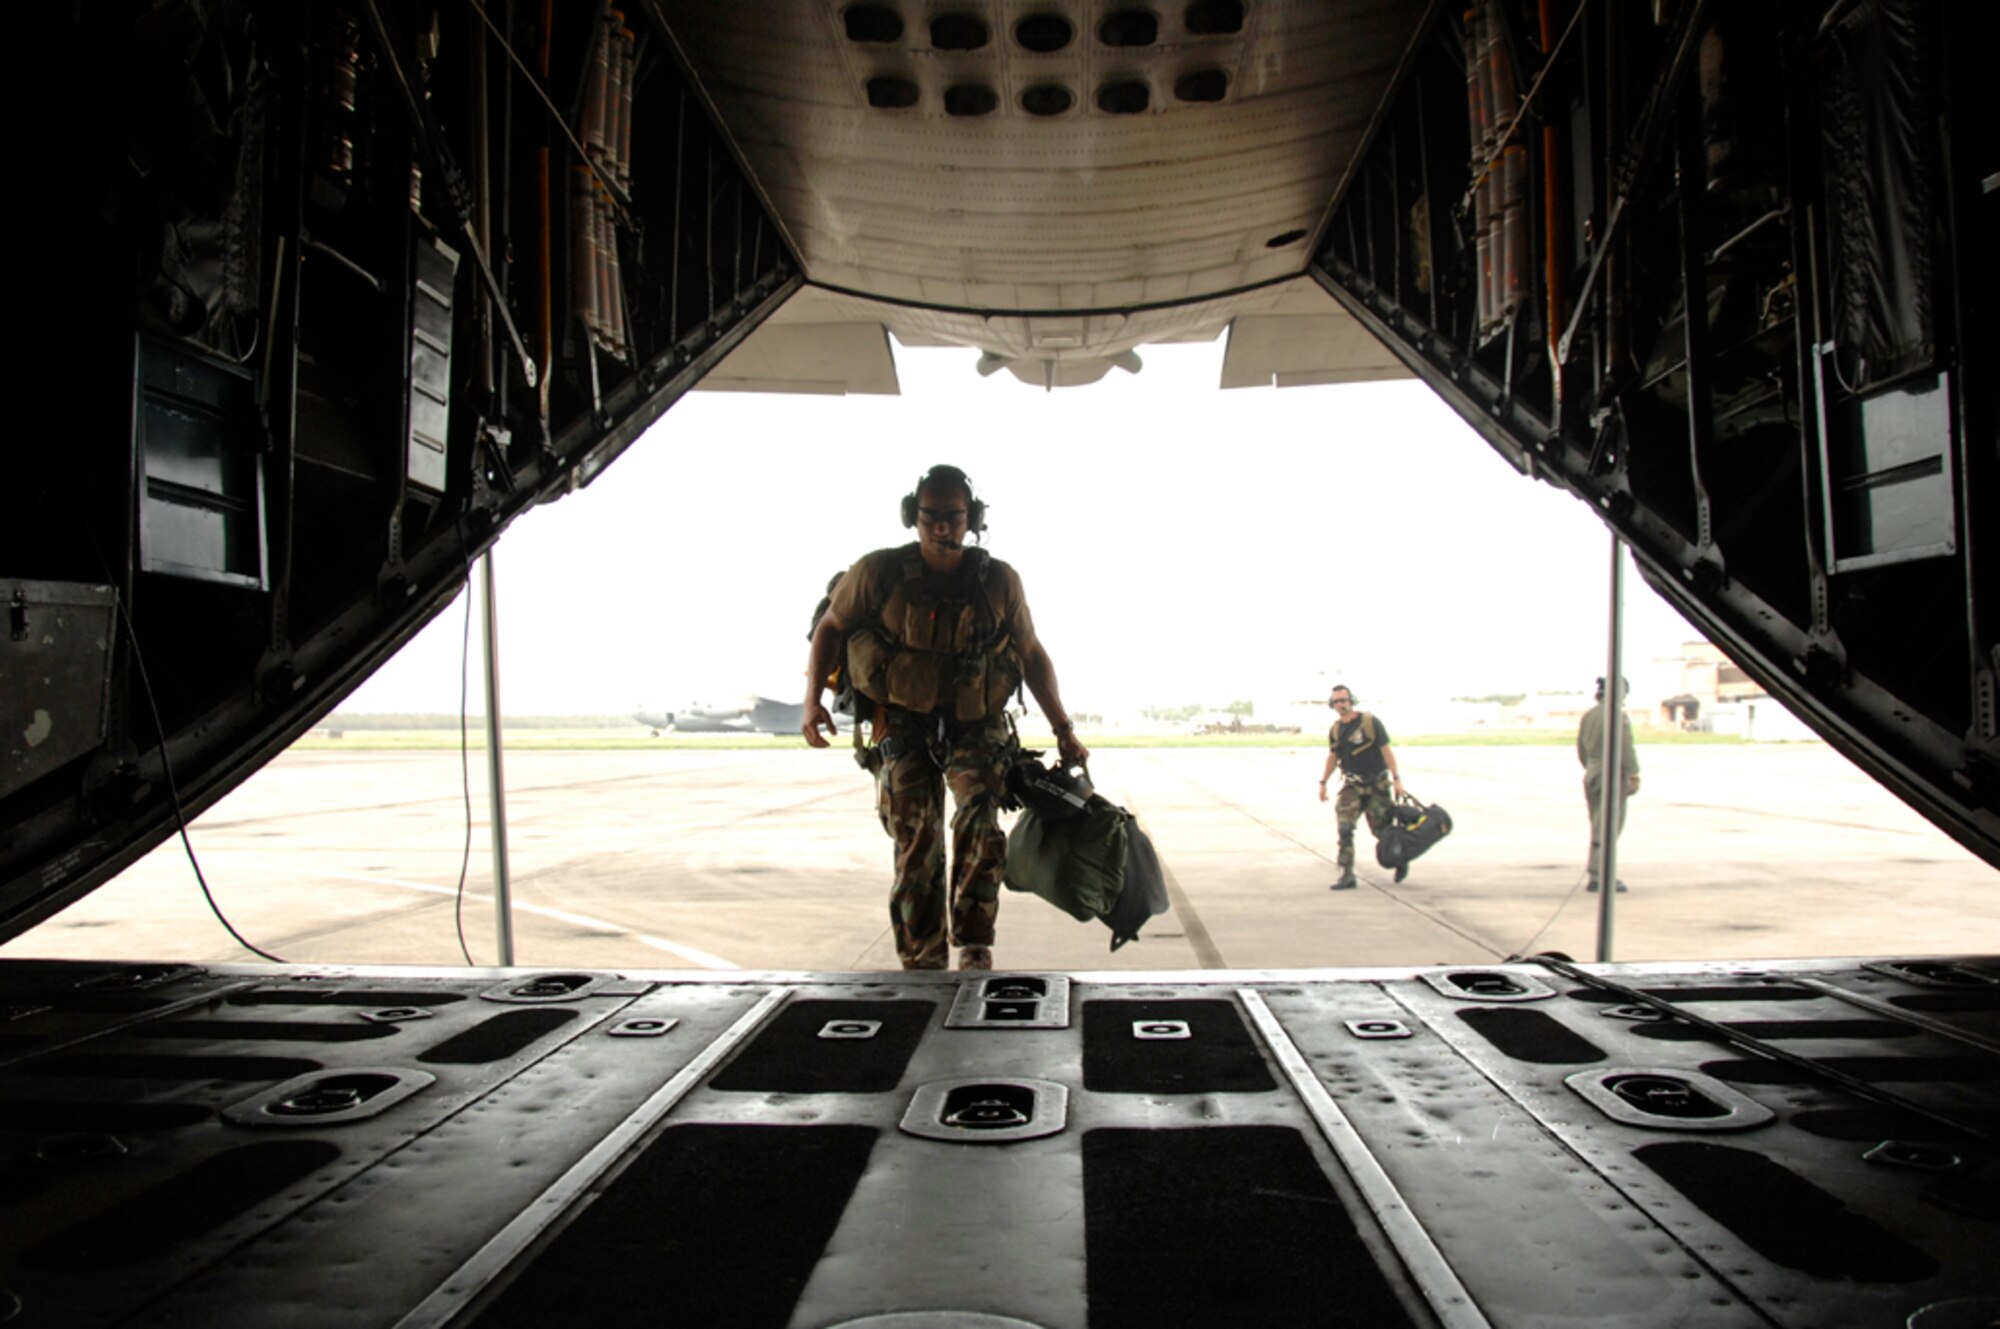 Tech. Sgt. Luigge Romanillo, 129th Rescue Wing pararescueman, embarks on an MC-130P Combat Shadow in Meridian, Miss., Sept. 3. Sergeant Romanillo was on search and rescue alert in Mississippi and returned to Ellington Field, Texas. More than 80 Airmen from the 129th RQW deployed to Ellington Field, Texas, as part of Joint Task Force 129, which supported Hurricane Gustav rescue operations. Air National Guardsmen from the 106th Rescue Wing, Gabreski Airport, N.Y., and 176th Wing, Kulis Air National Guard Base, Alaska, were also part of the rescue task force. (U.S. Air Force photo by Tech. Sgt. Ray Aquino)